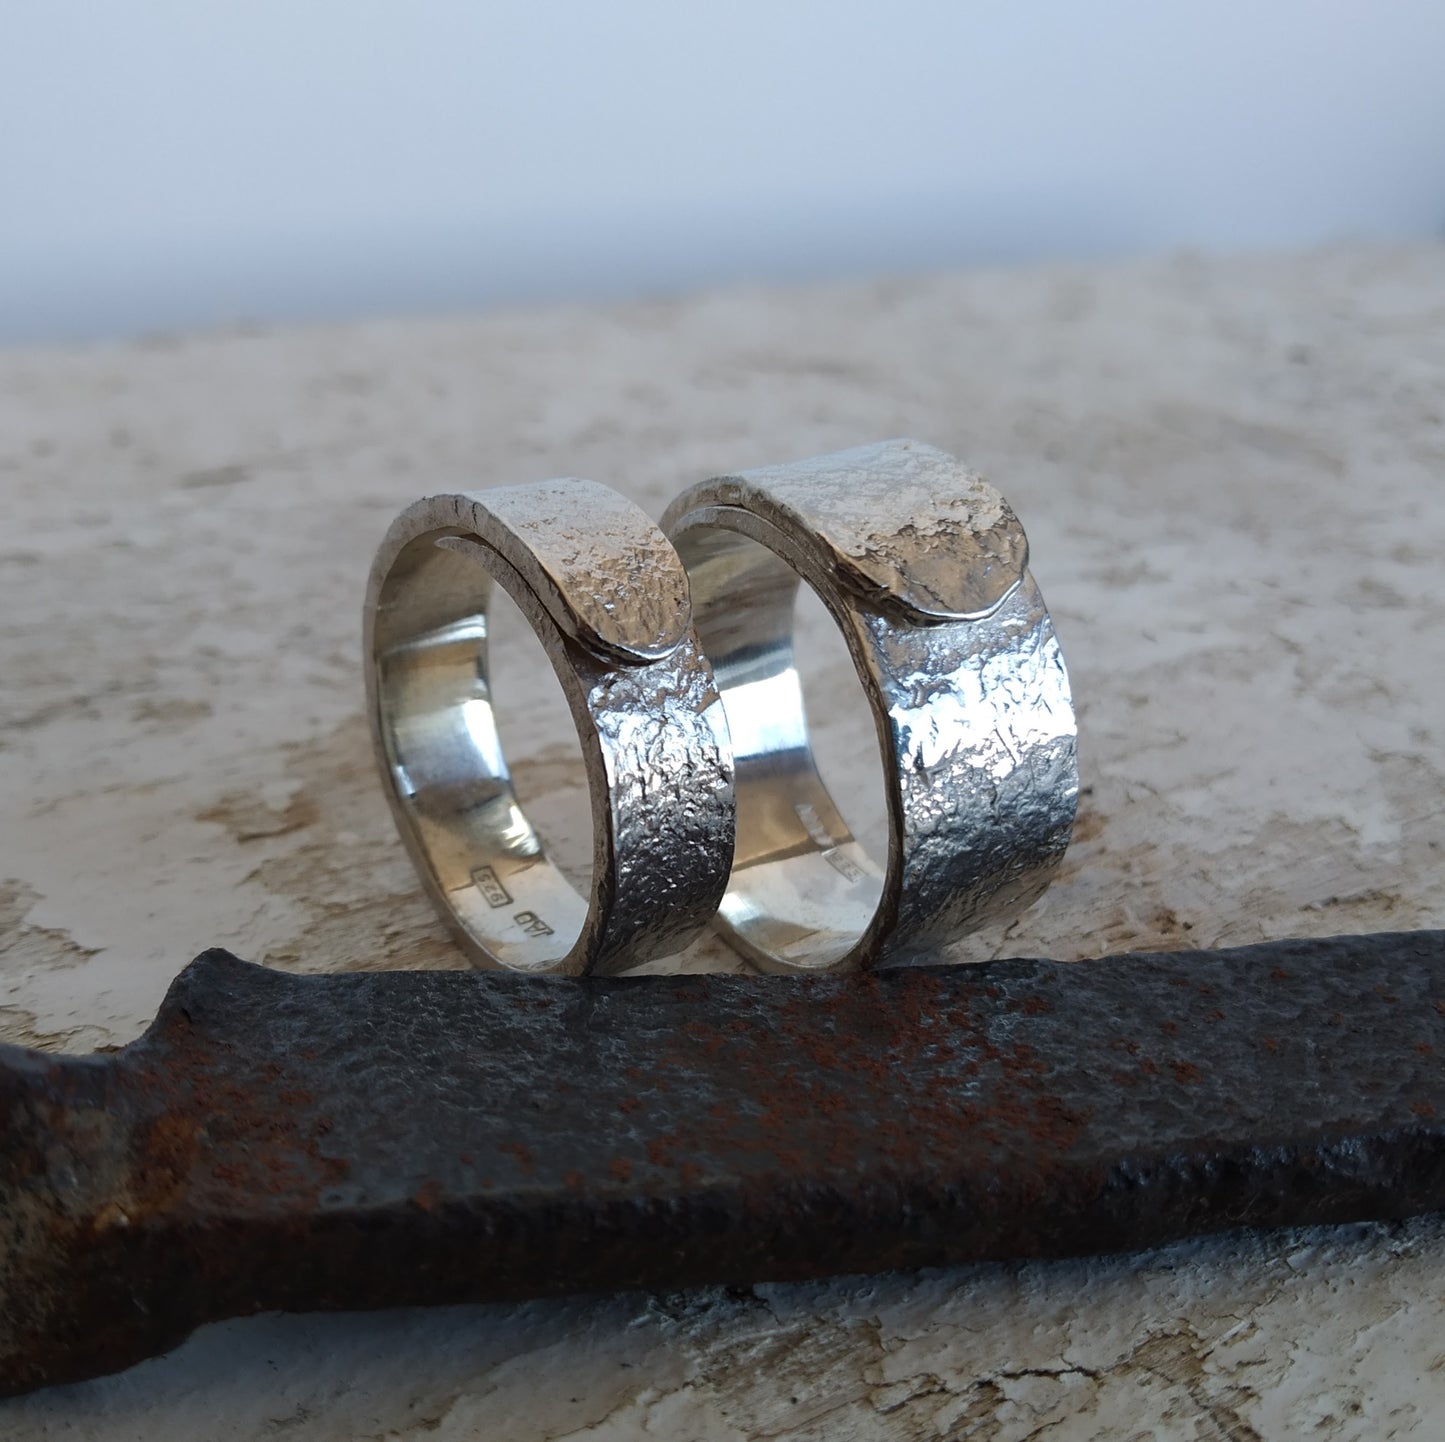 White Rust n. 1 - Ring and Band